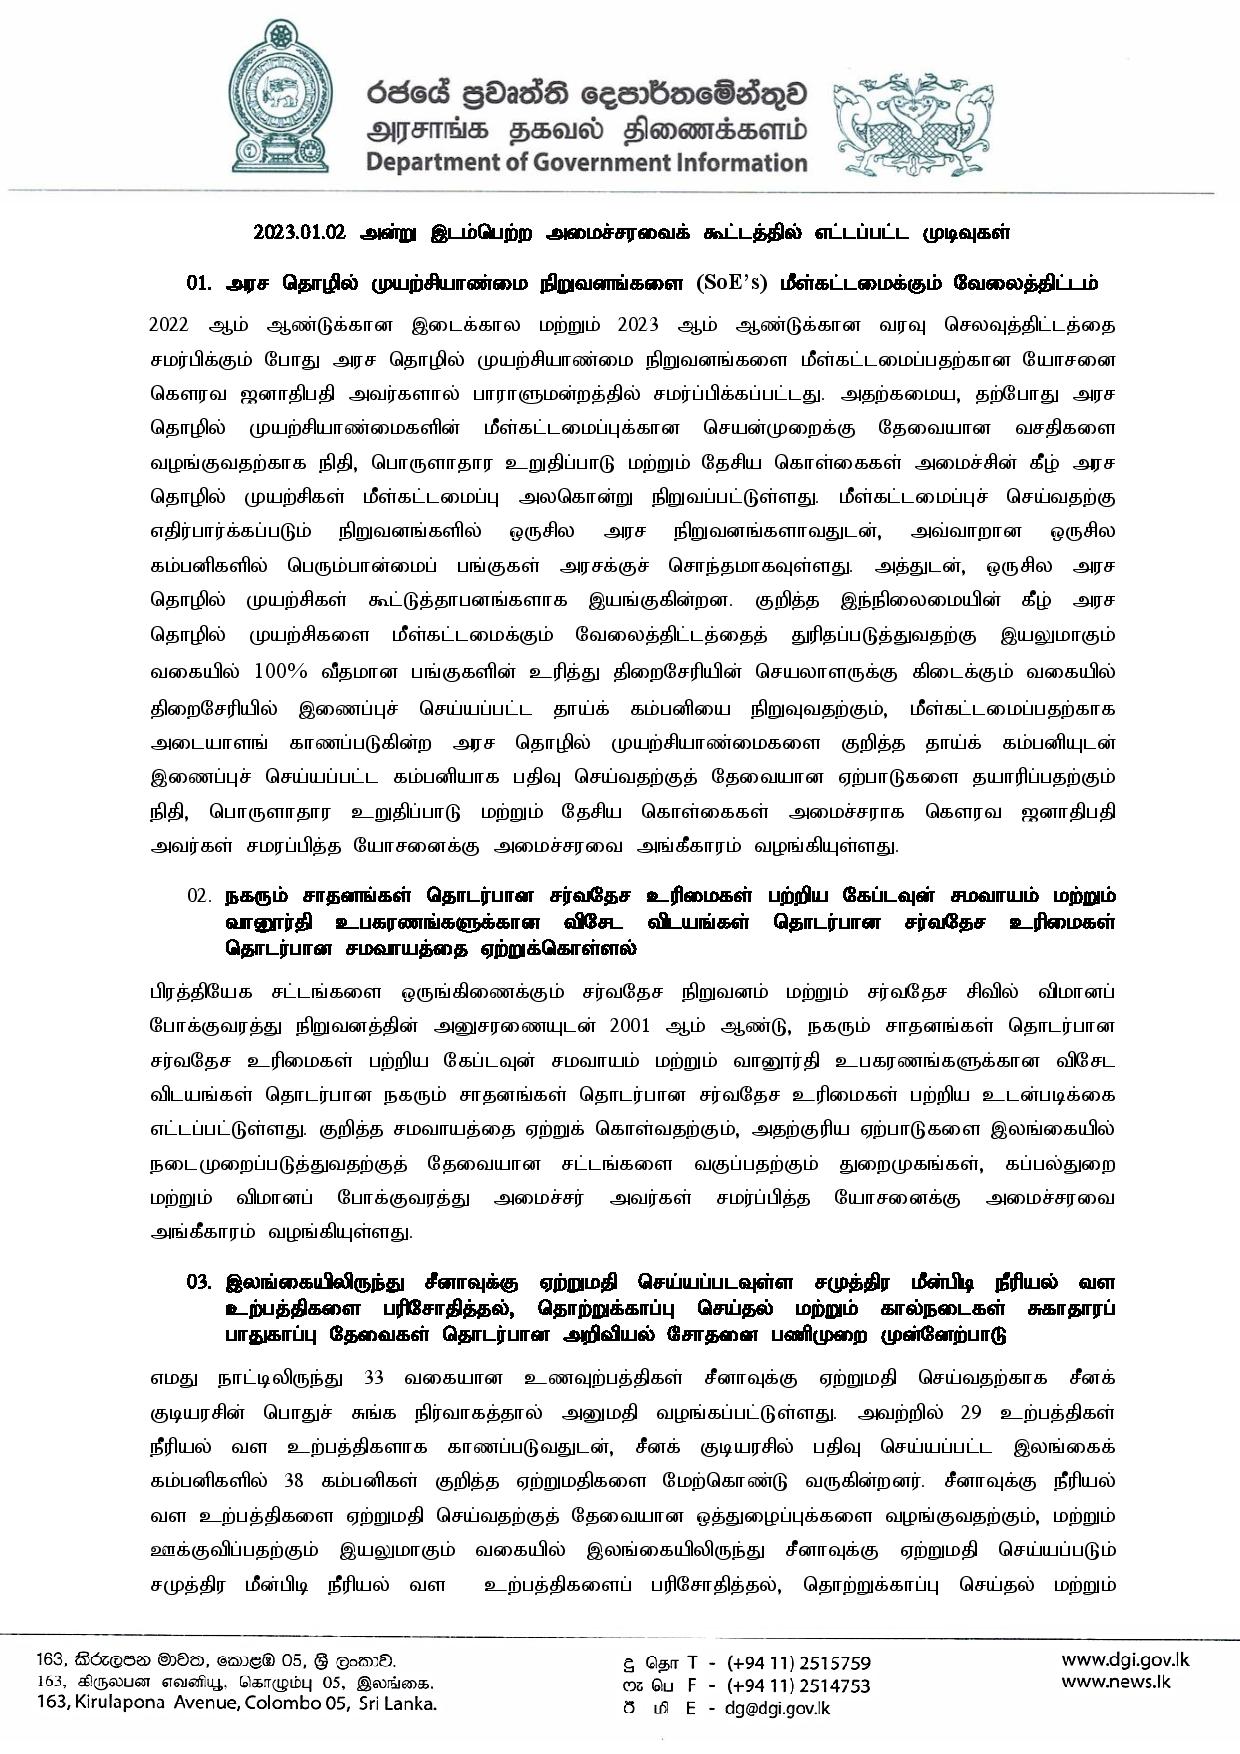 Cabinet Decisions on 02.01.2023 Tamil page 001